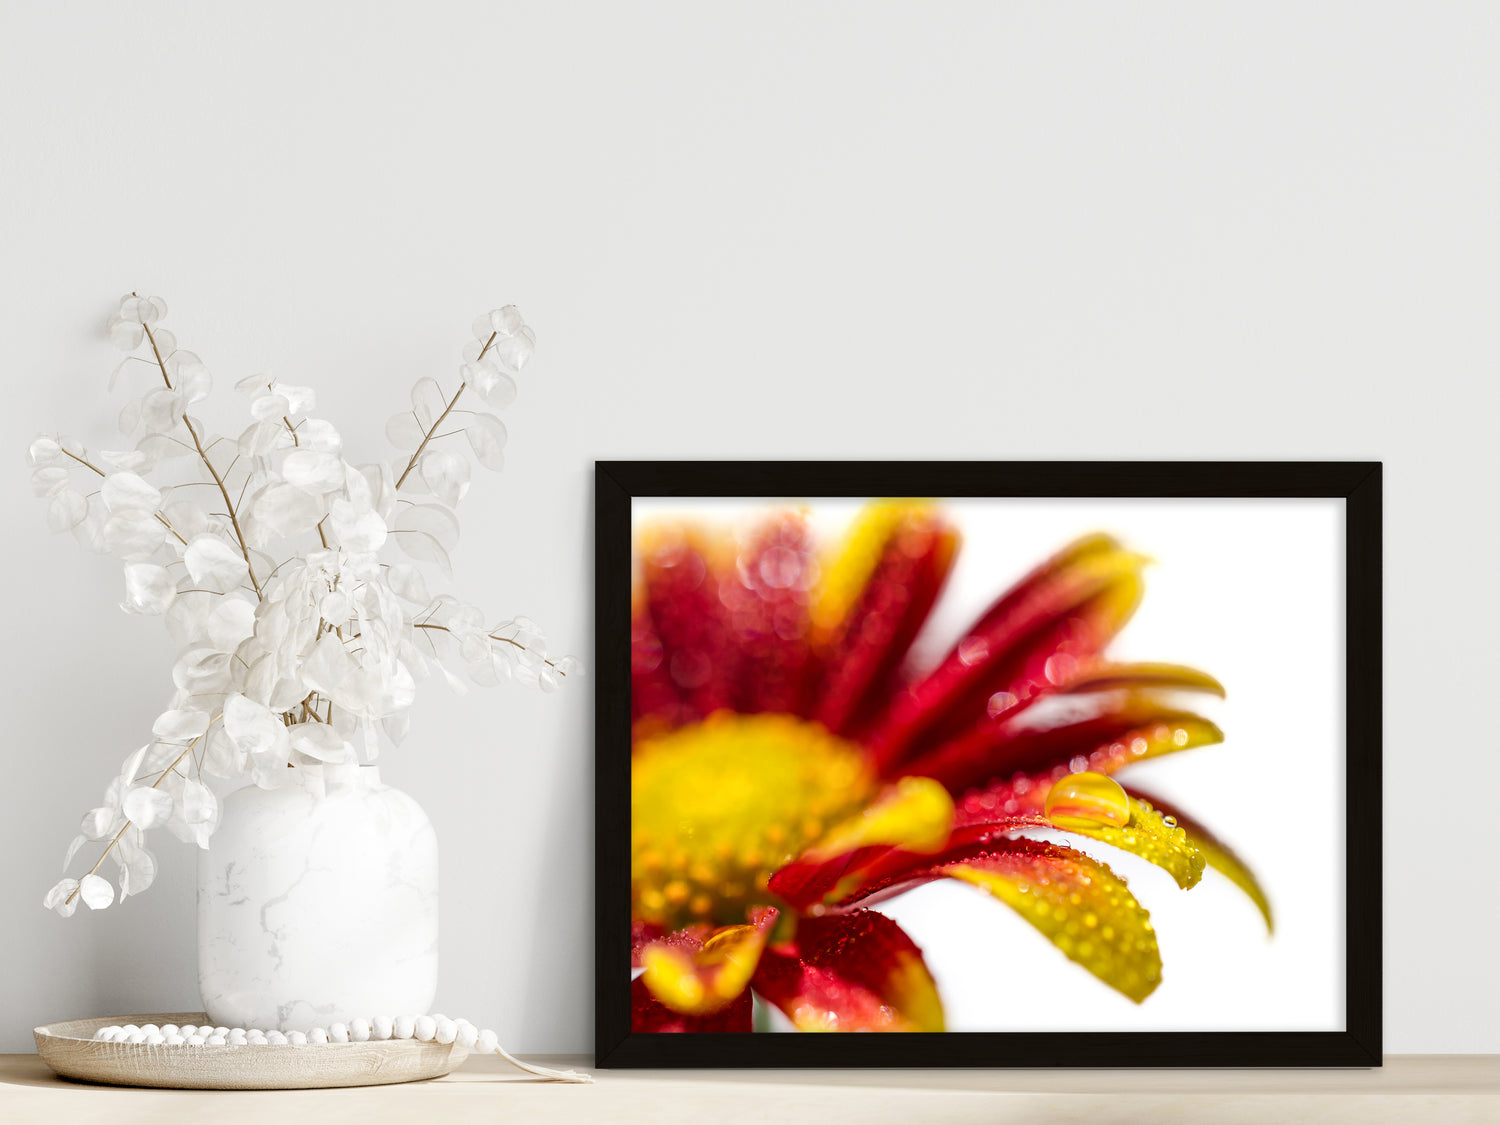 Versatility: Framed wall art suits any decor style – traditional, modern, boho, and everything in between. The wide range of frame and artwork options allows for endless customization.